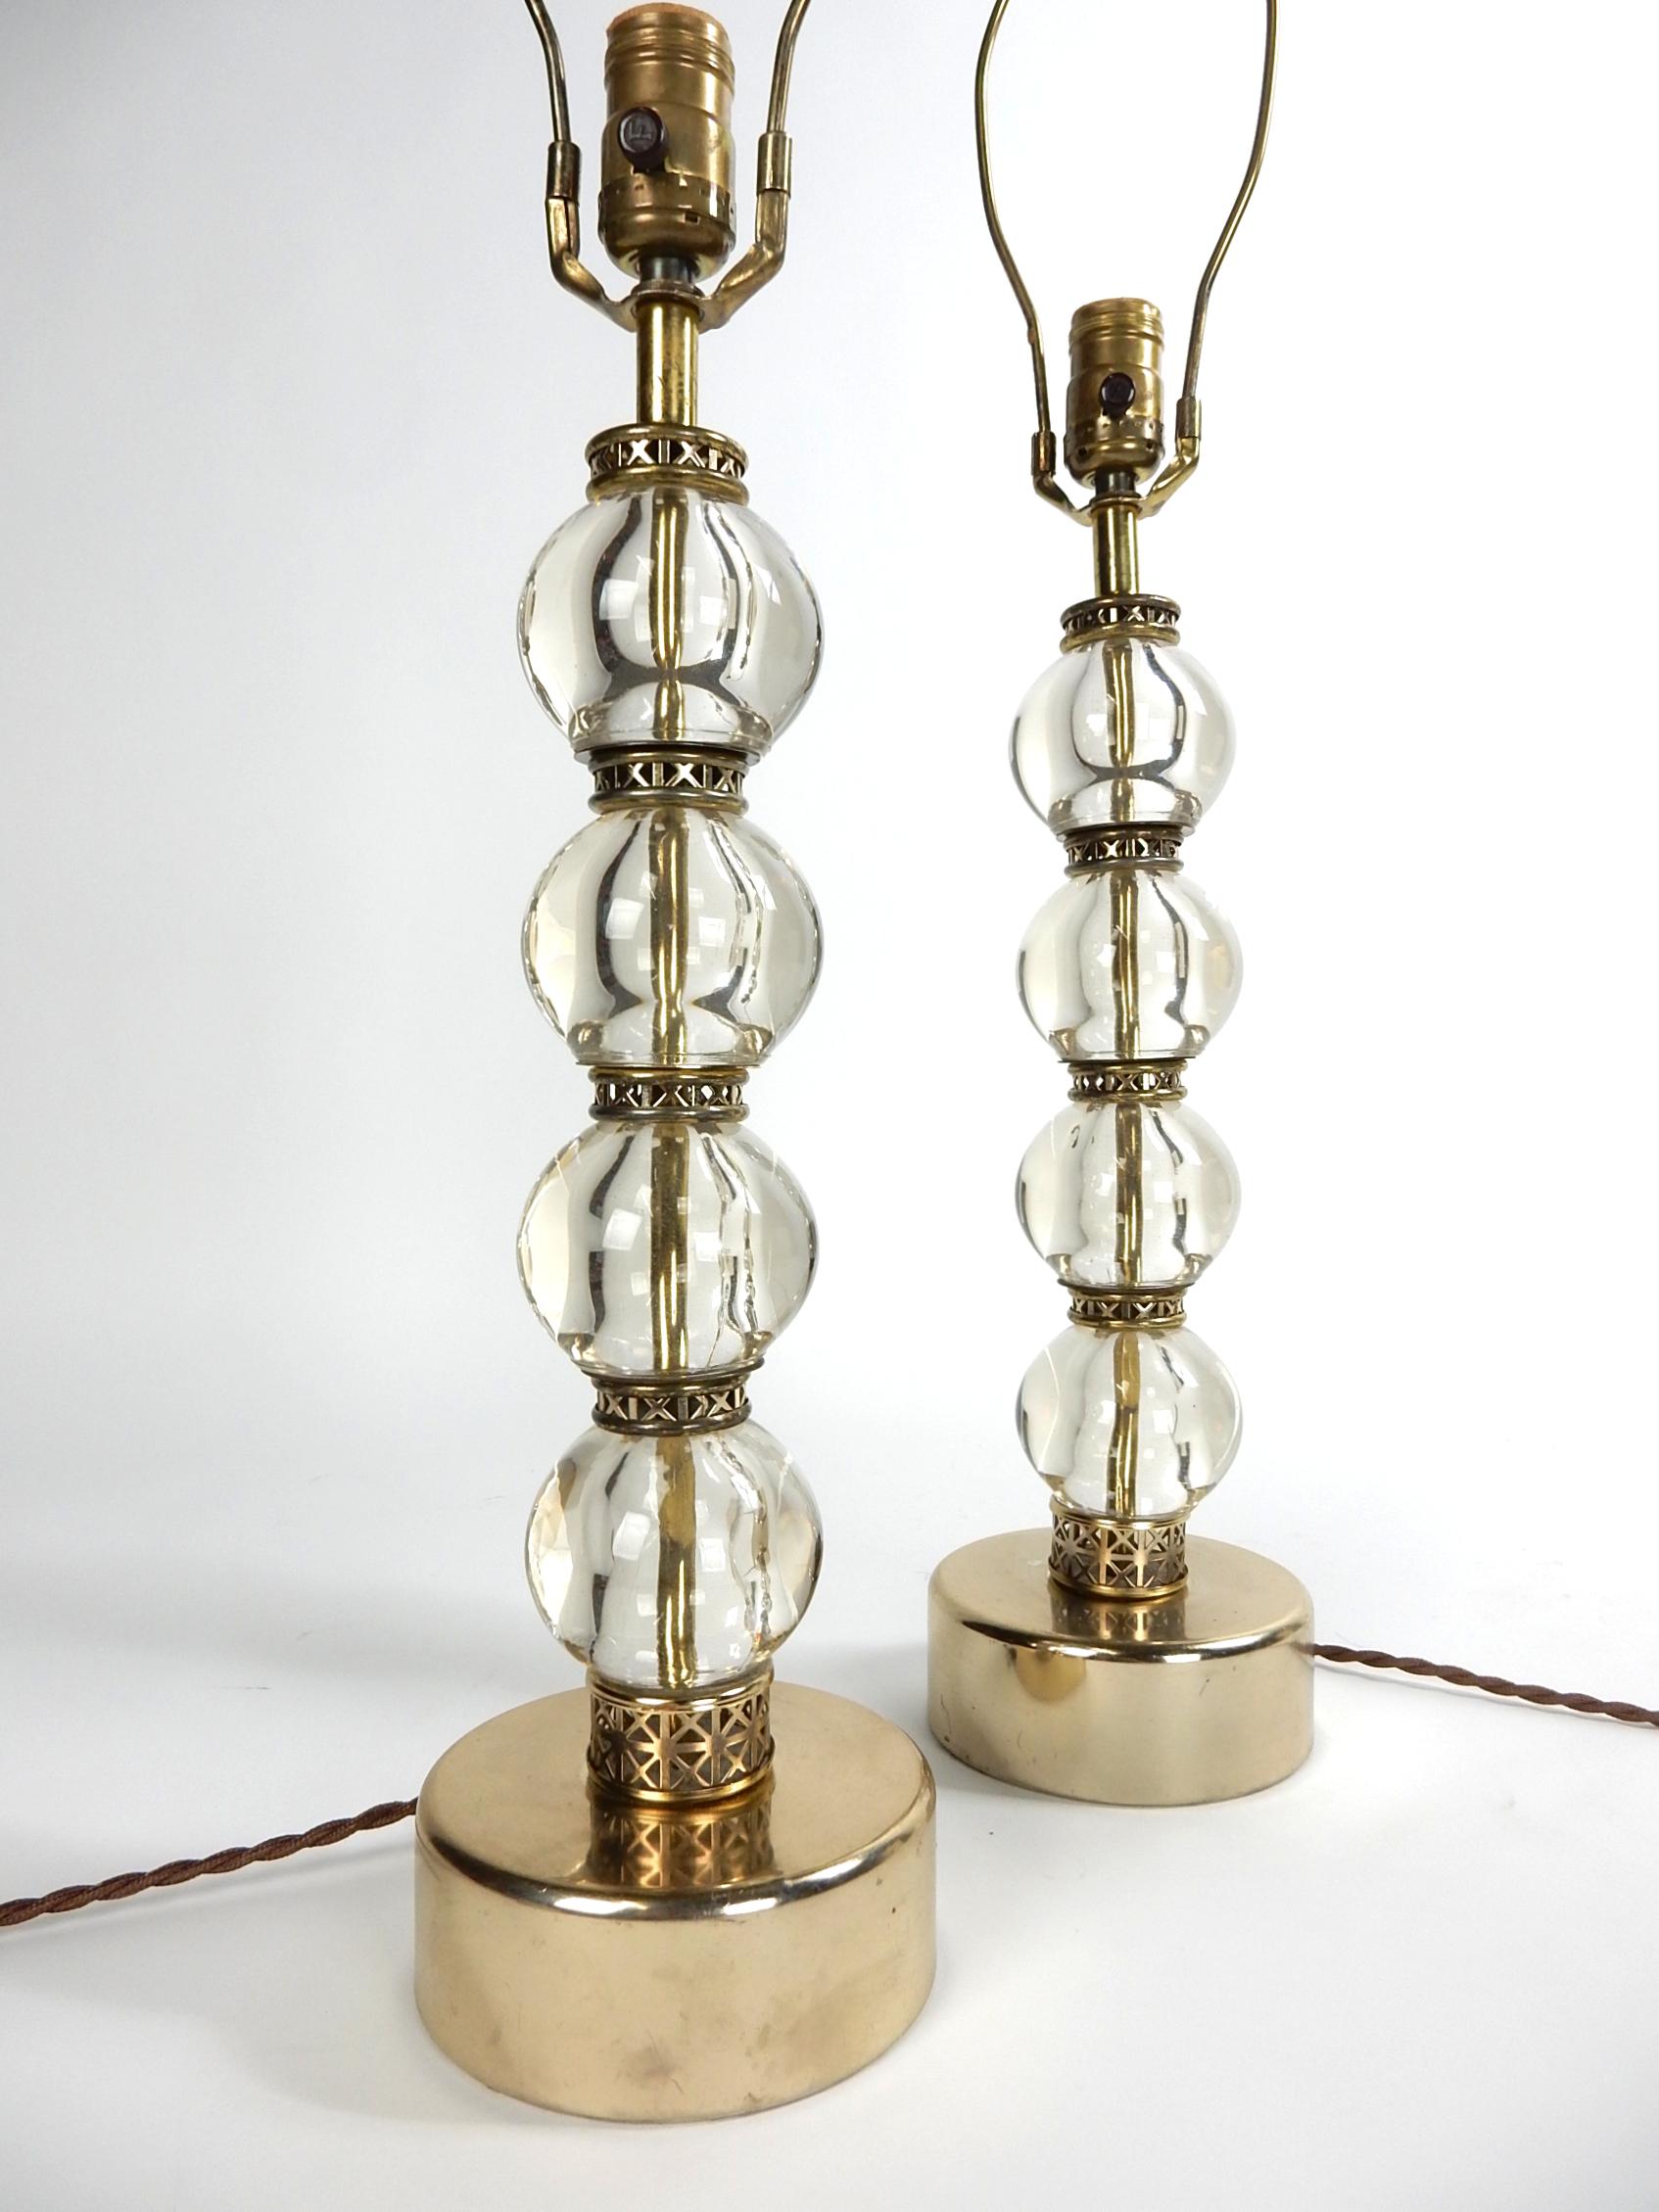 A pair of crystal glass ball lamps In the manner of Jacques Adnet and Mathieu Matégot.
3-1/2